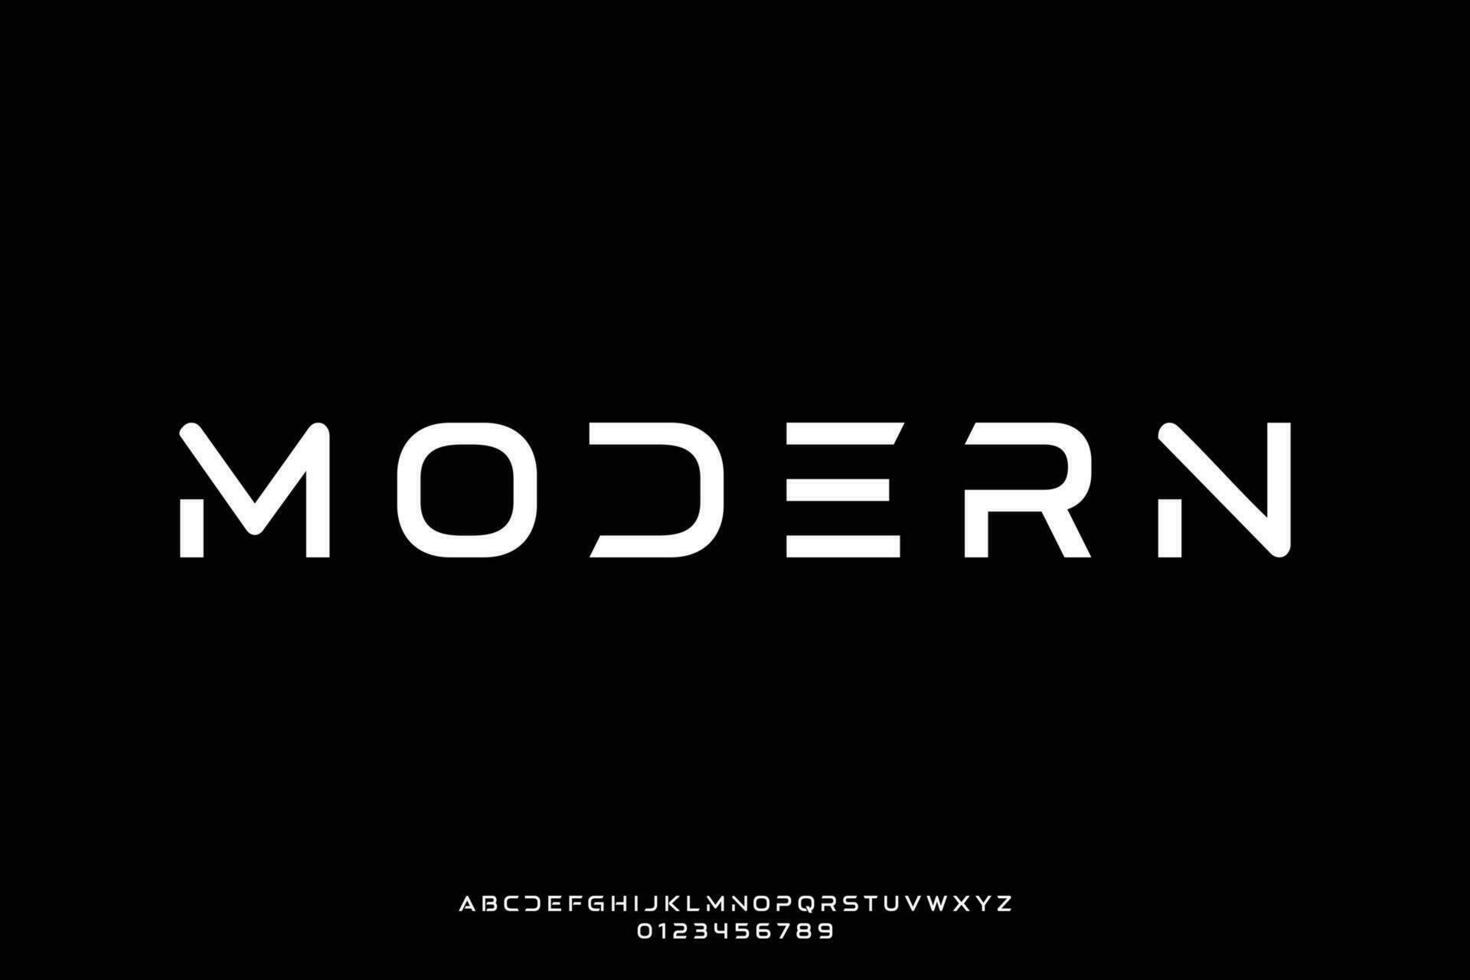 Abstract modern typeface display font vector. Unique contemporary typography style illustration vector